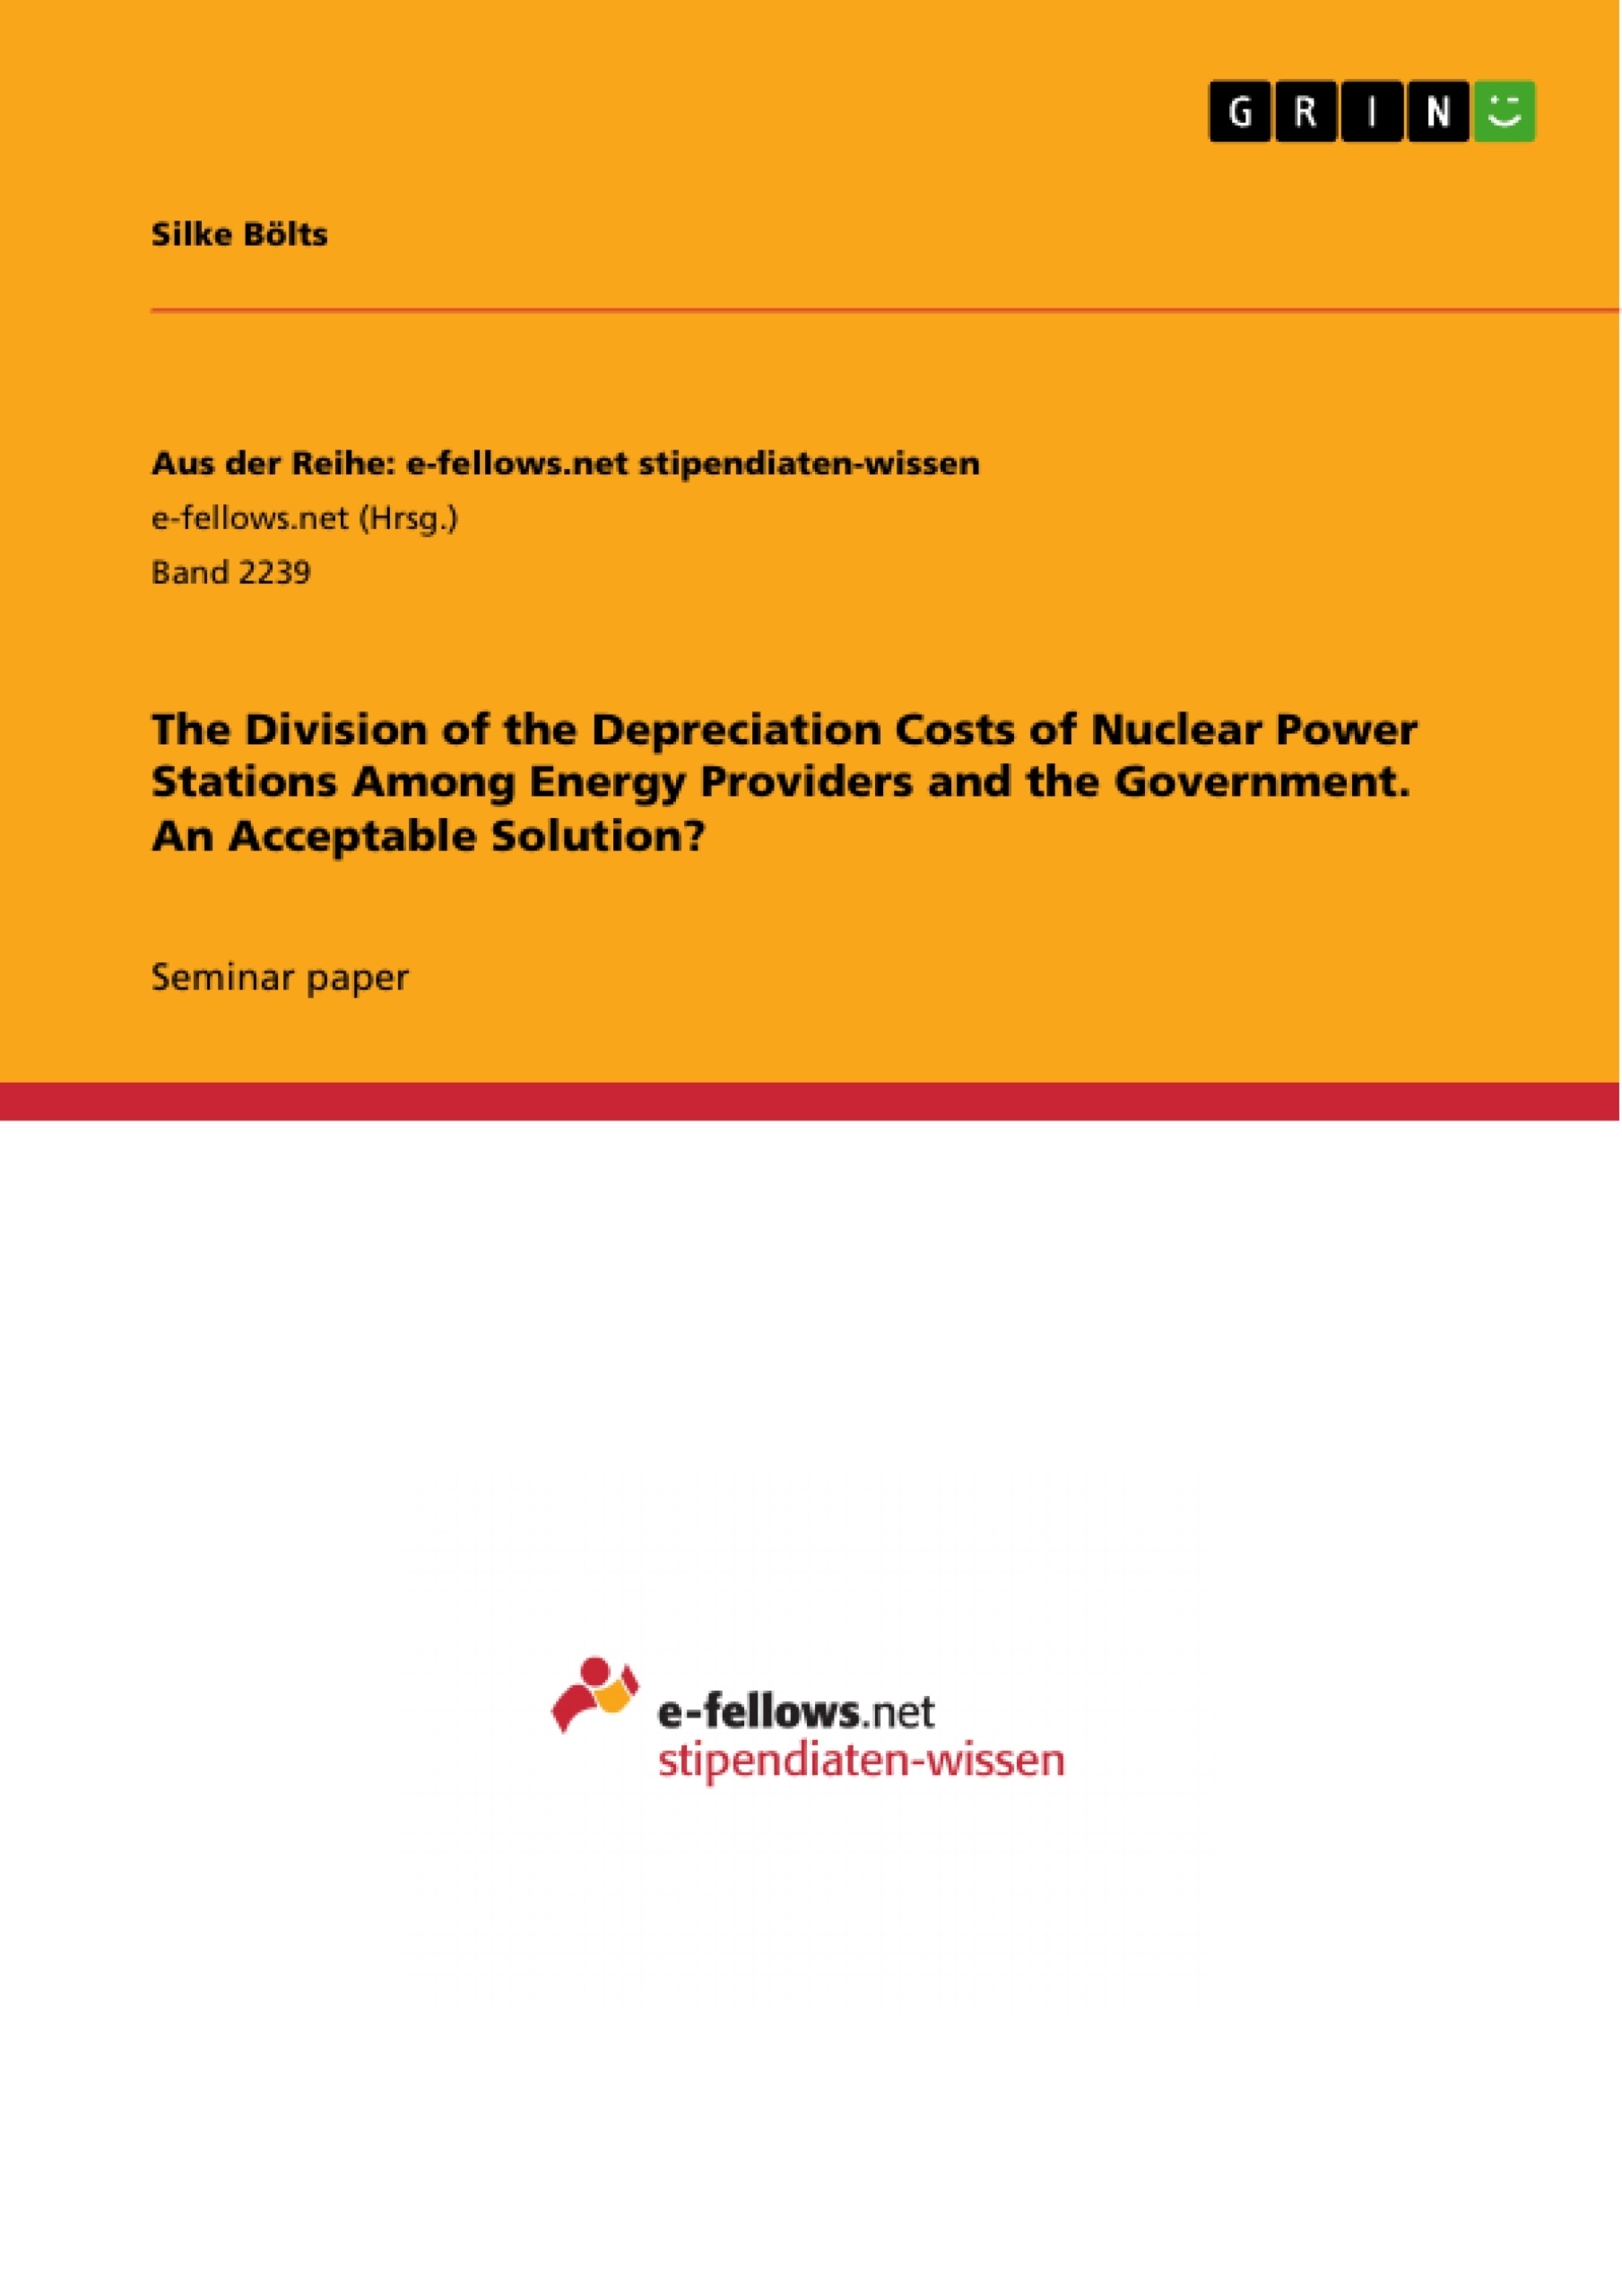 Titre: The Division of the Depreciation Costs of Nuclear Power Stations Among Energy Providers and the Government. An Acceptable Solution?